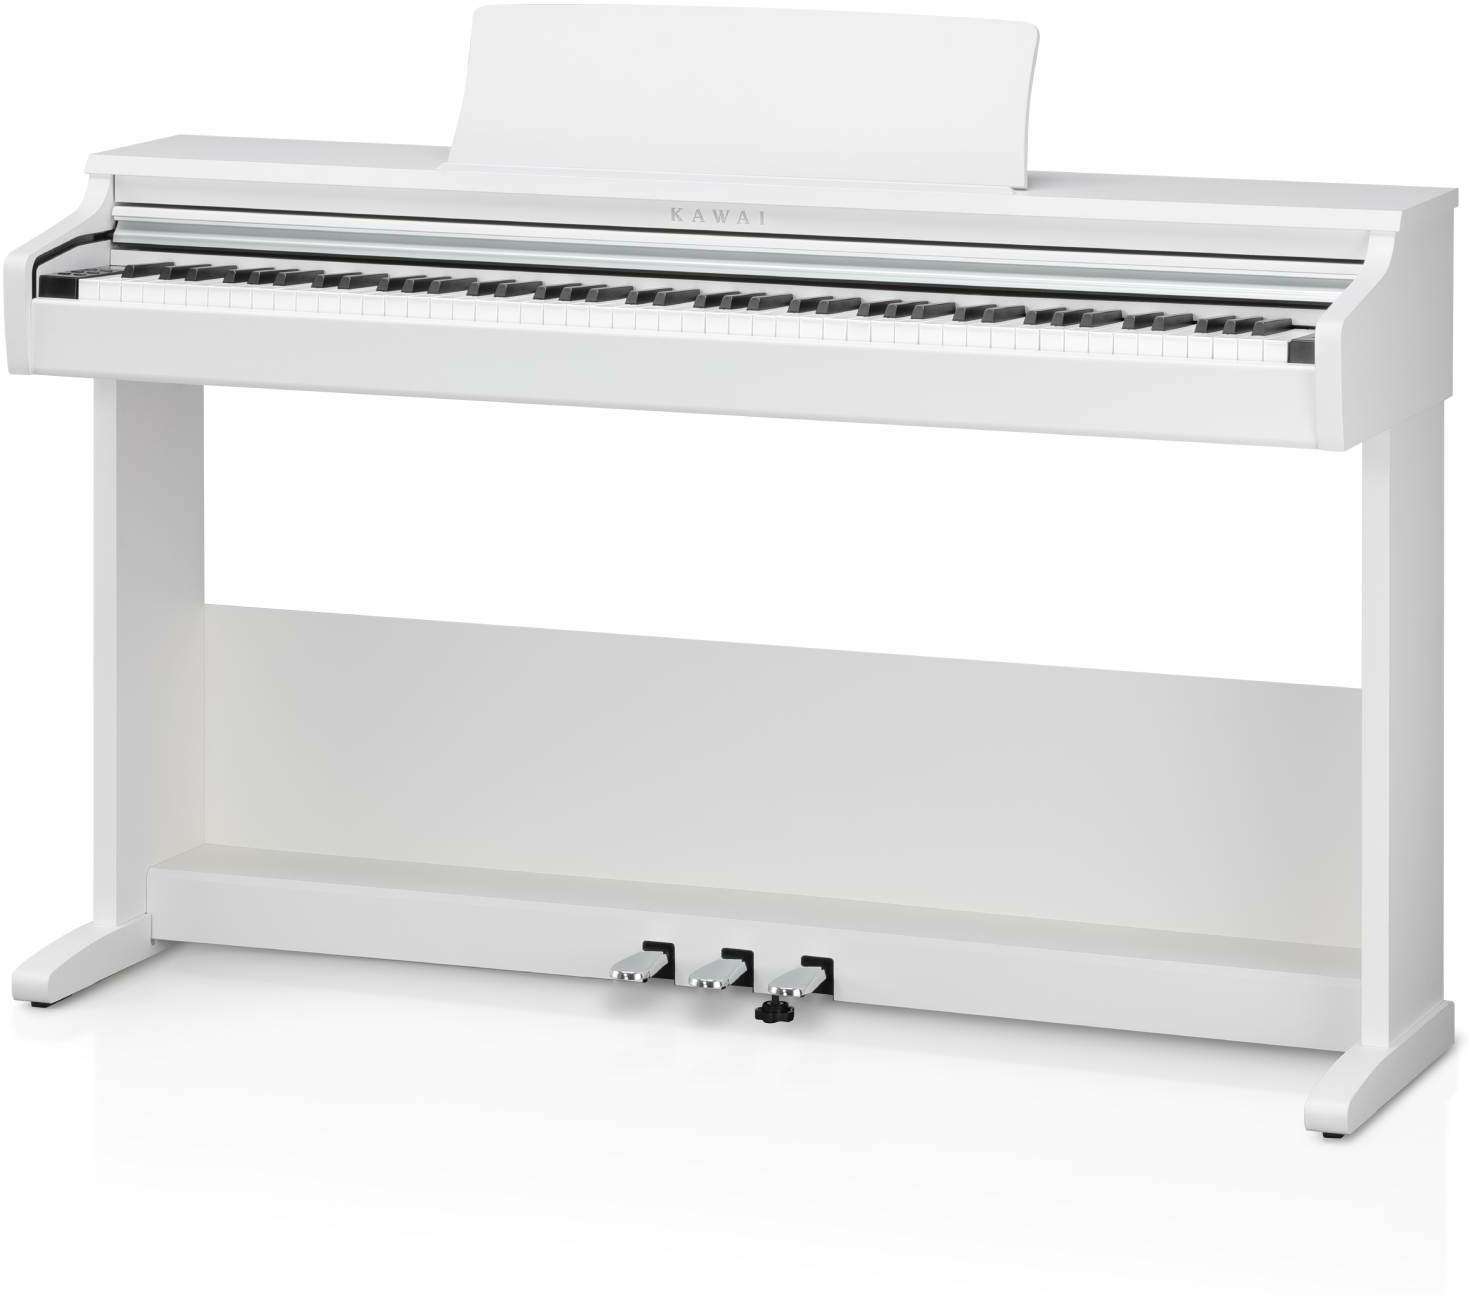 Kawai Kdp75 Wh - Digital piano with stand - Main picture